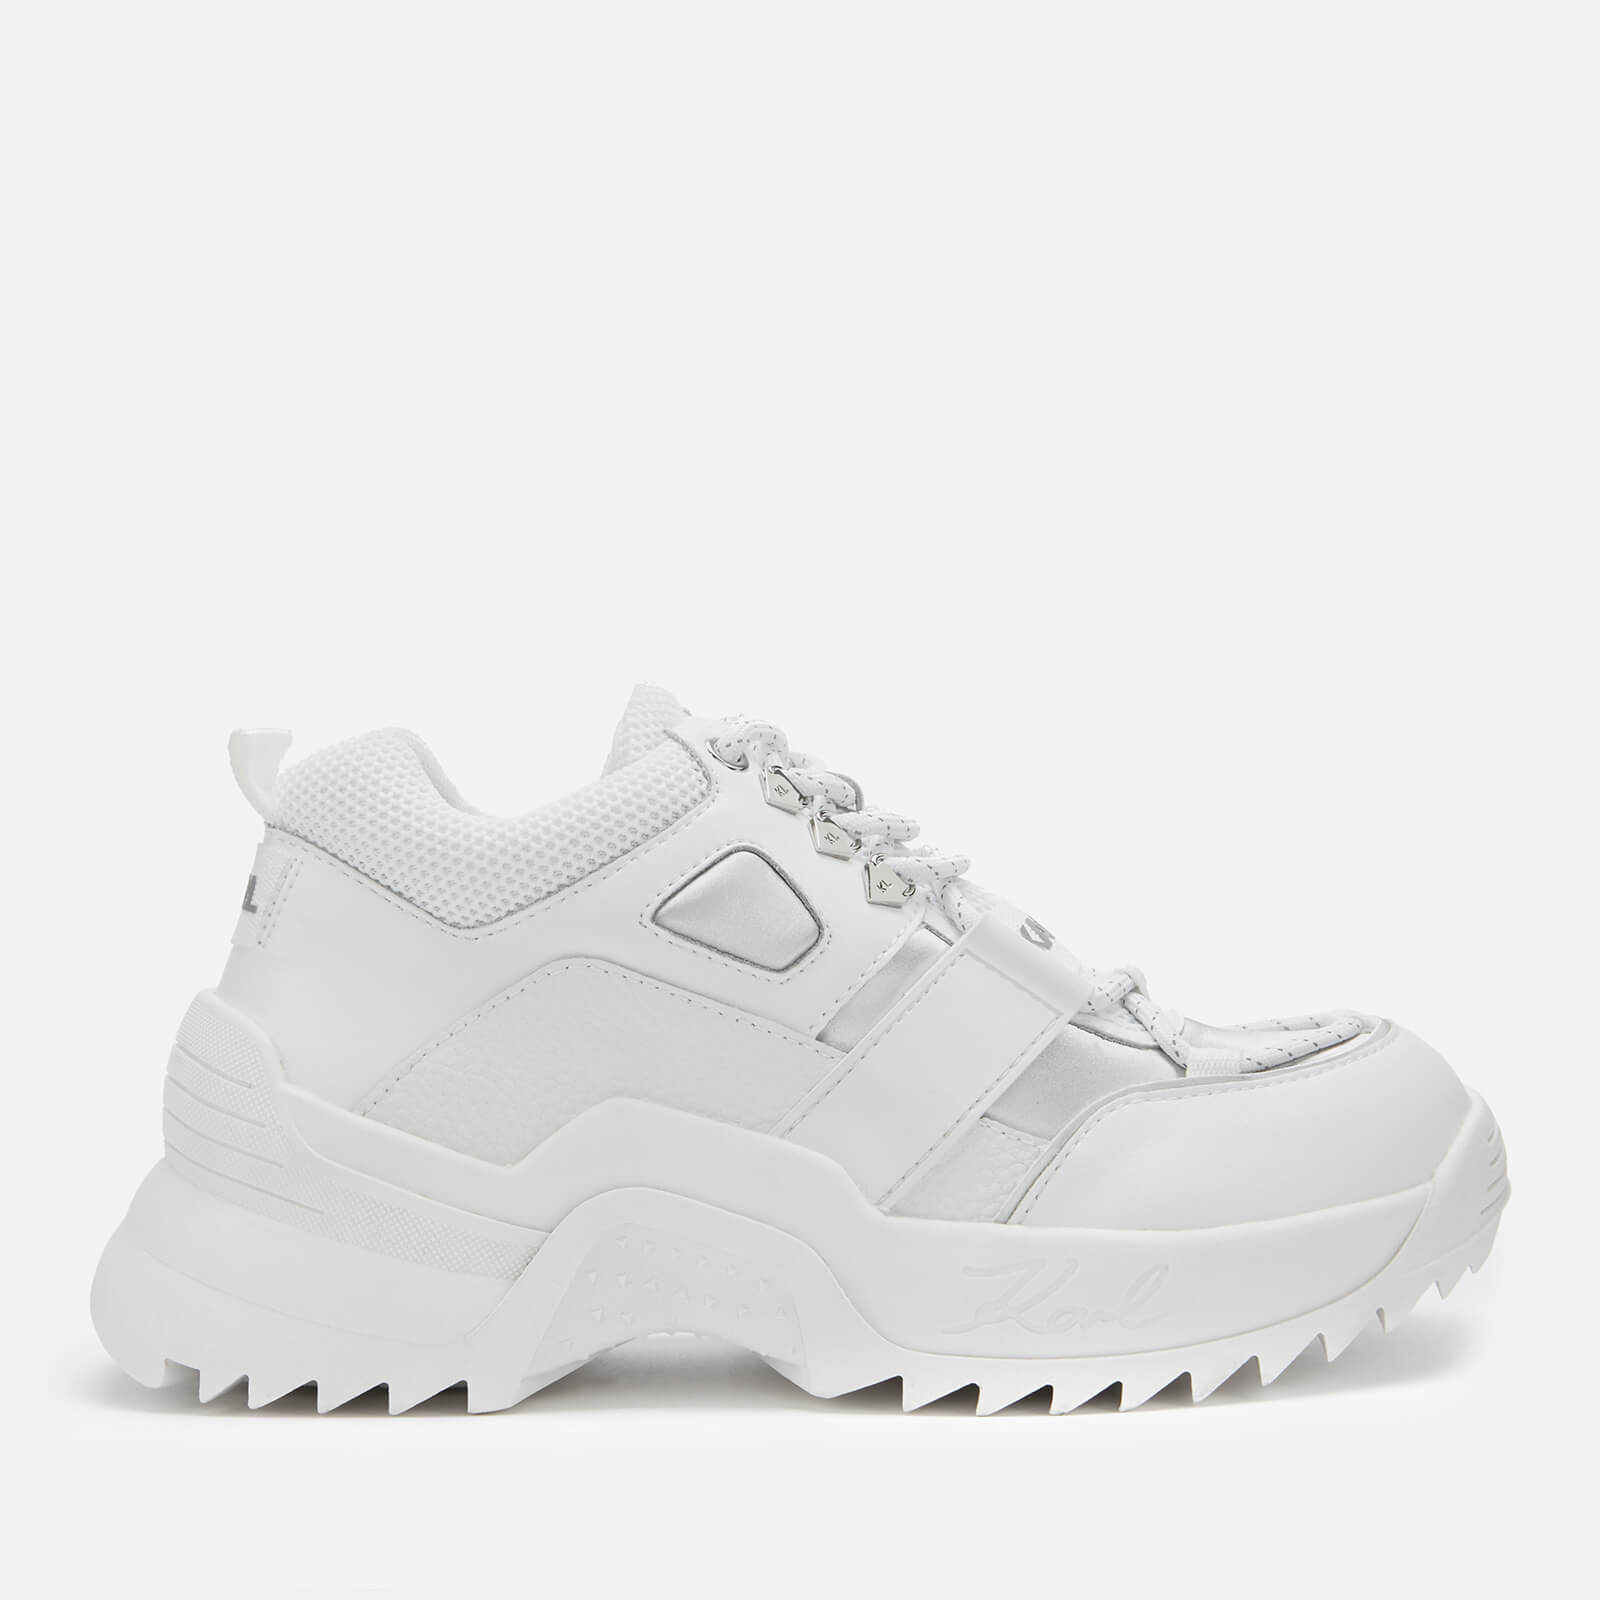 karl lagerfeld white trainers